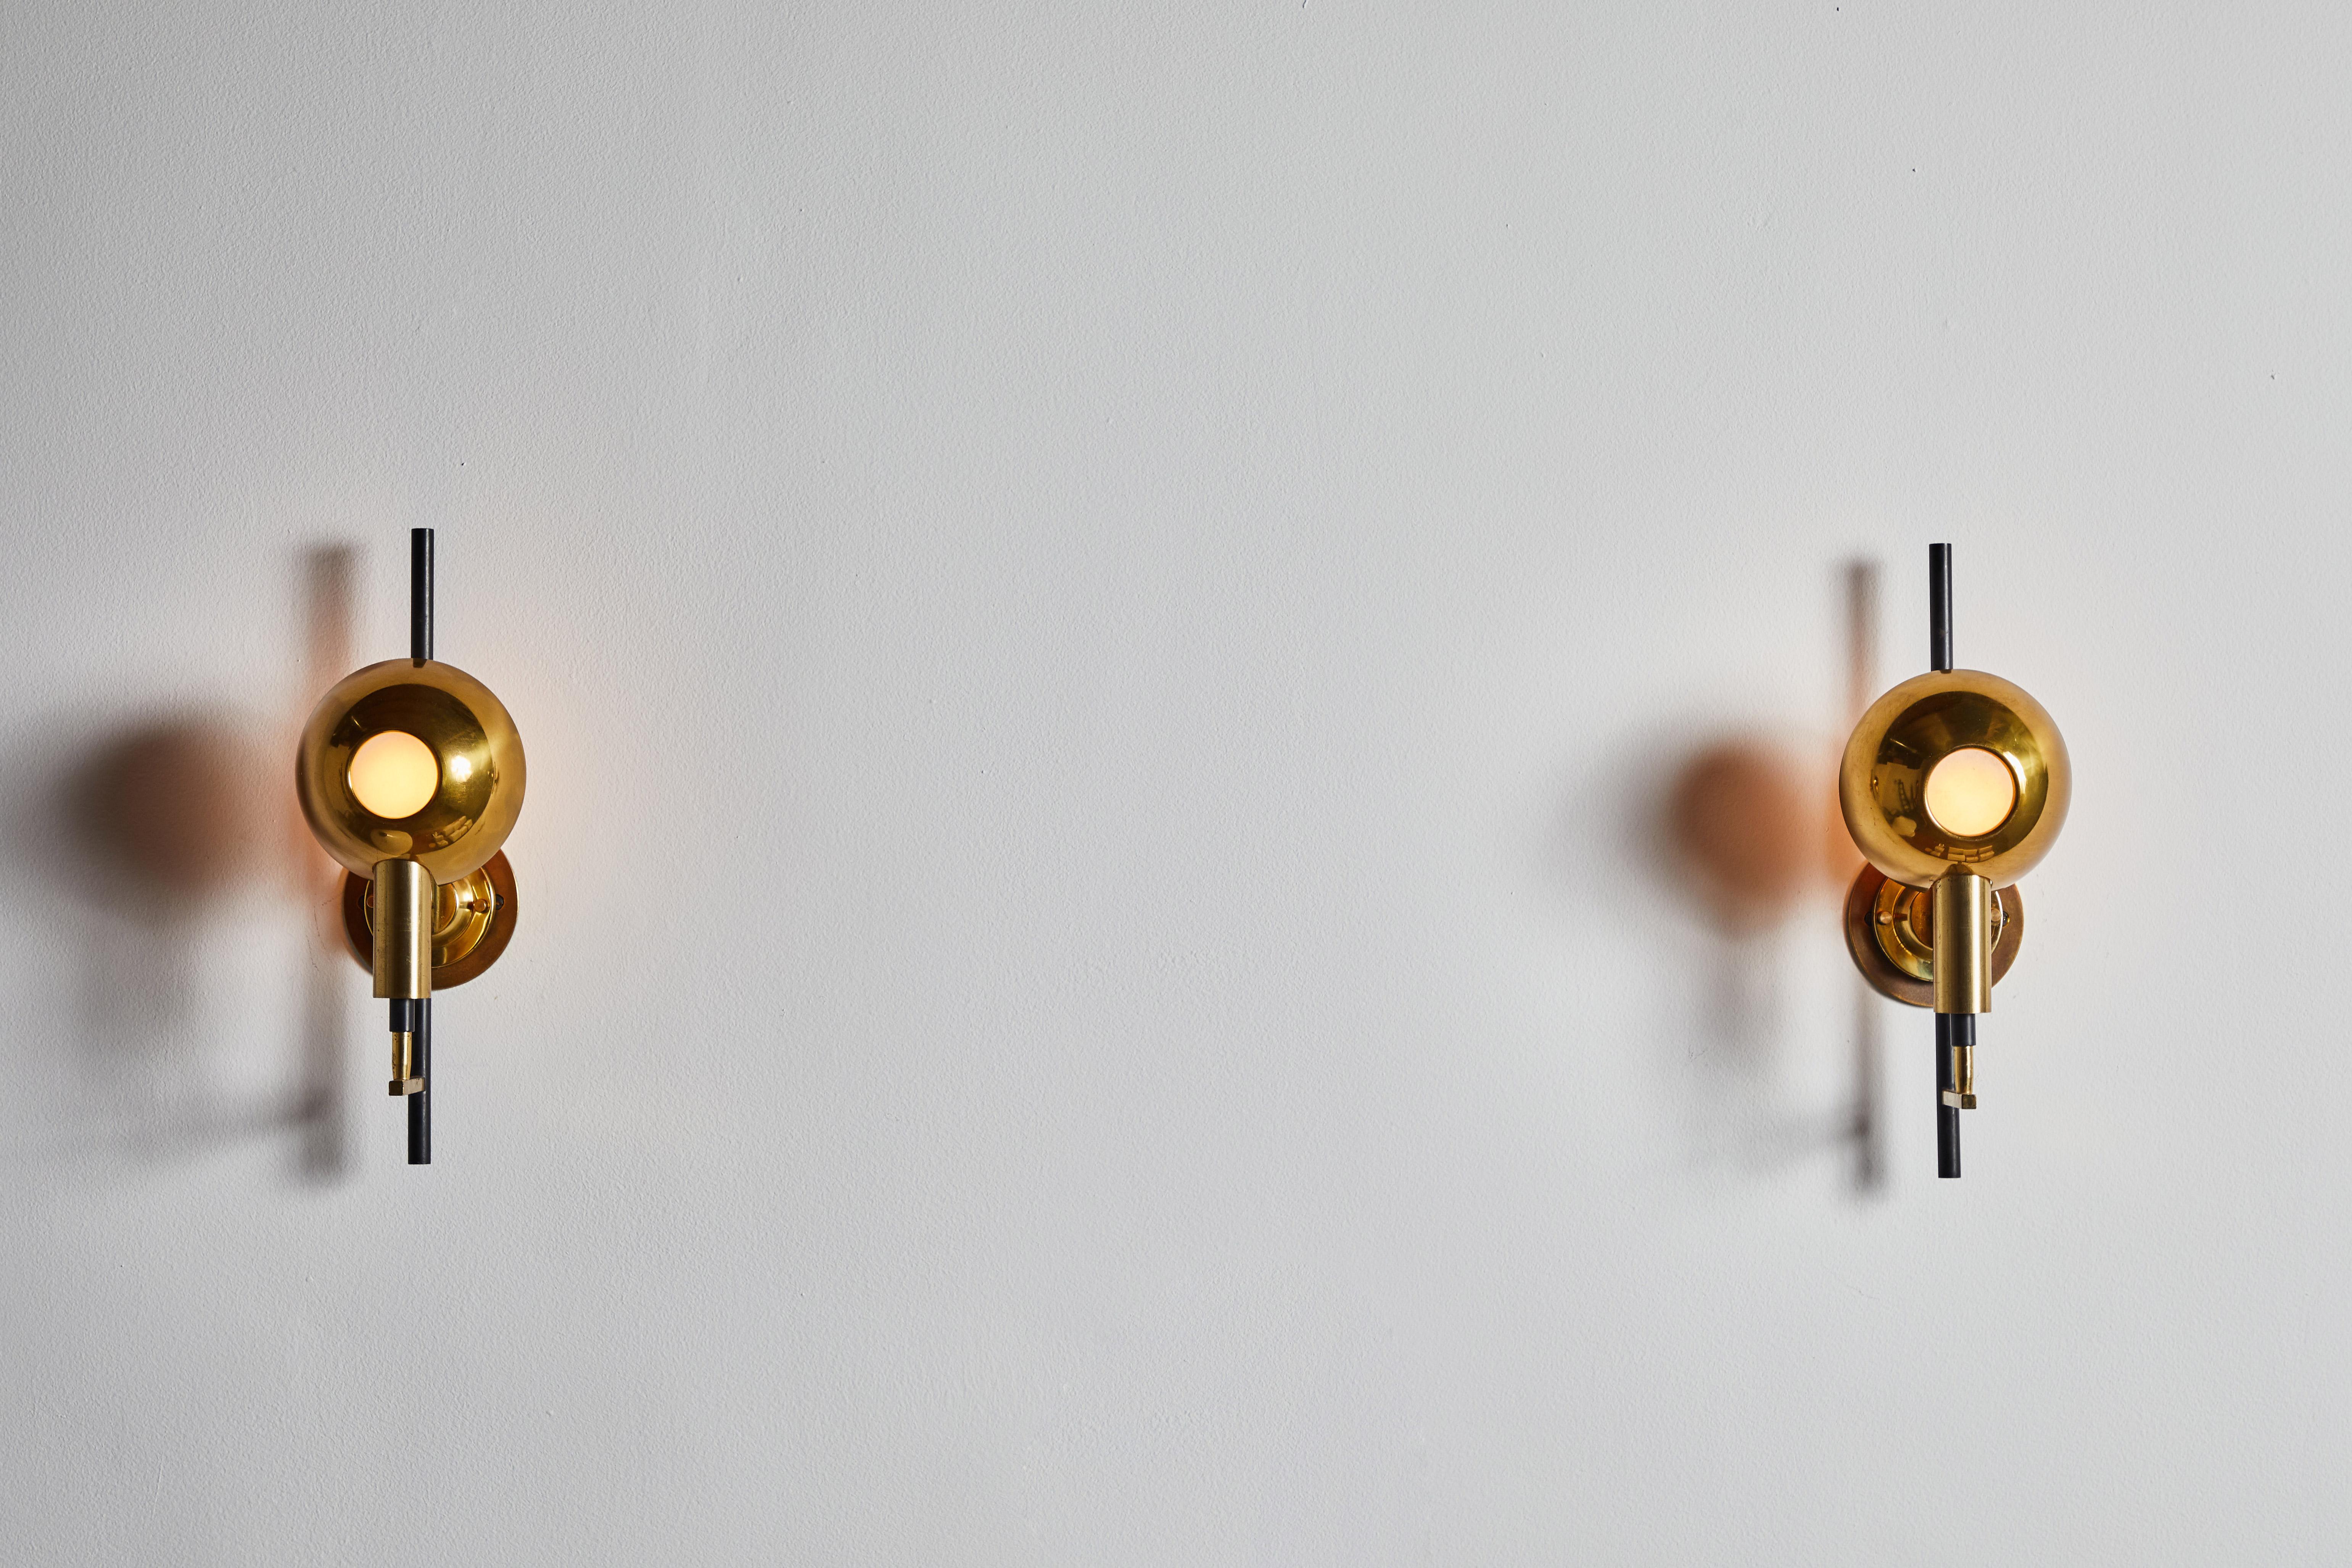 Pair of sconces by Stilnovo. Manufactured in Italy, circa 1960s. Brass, enameled metal. Rewired for U.S. junction boxes. Retains original manufacturers' engraving. Each light takes one E27 100w maximum bulb. Bulbs provided as a onetime courtesy.